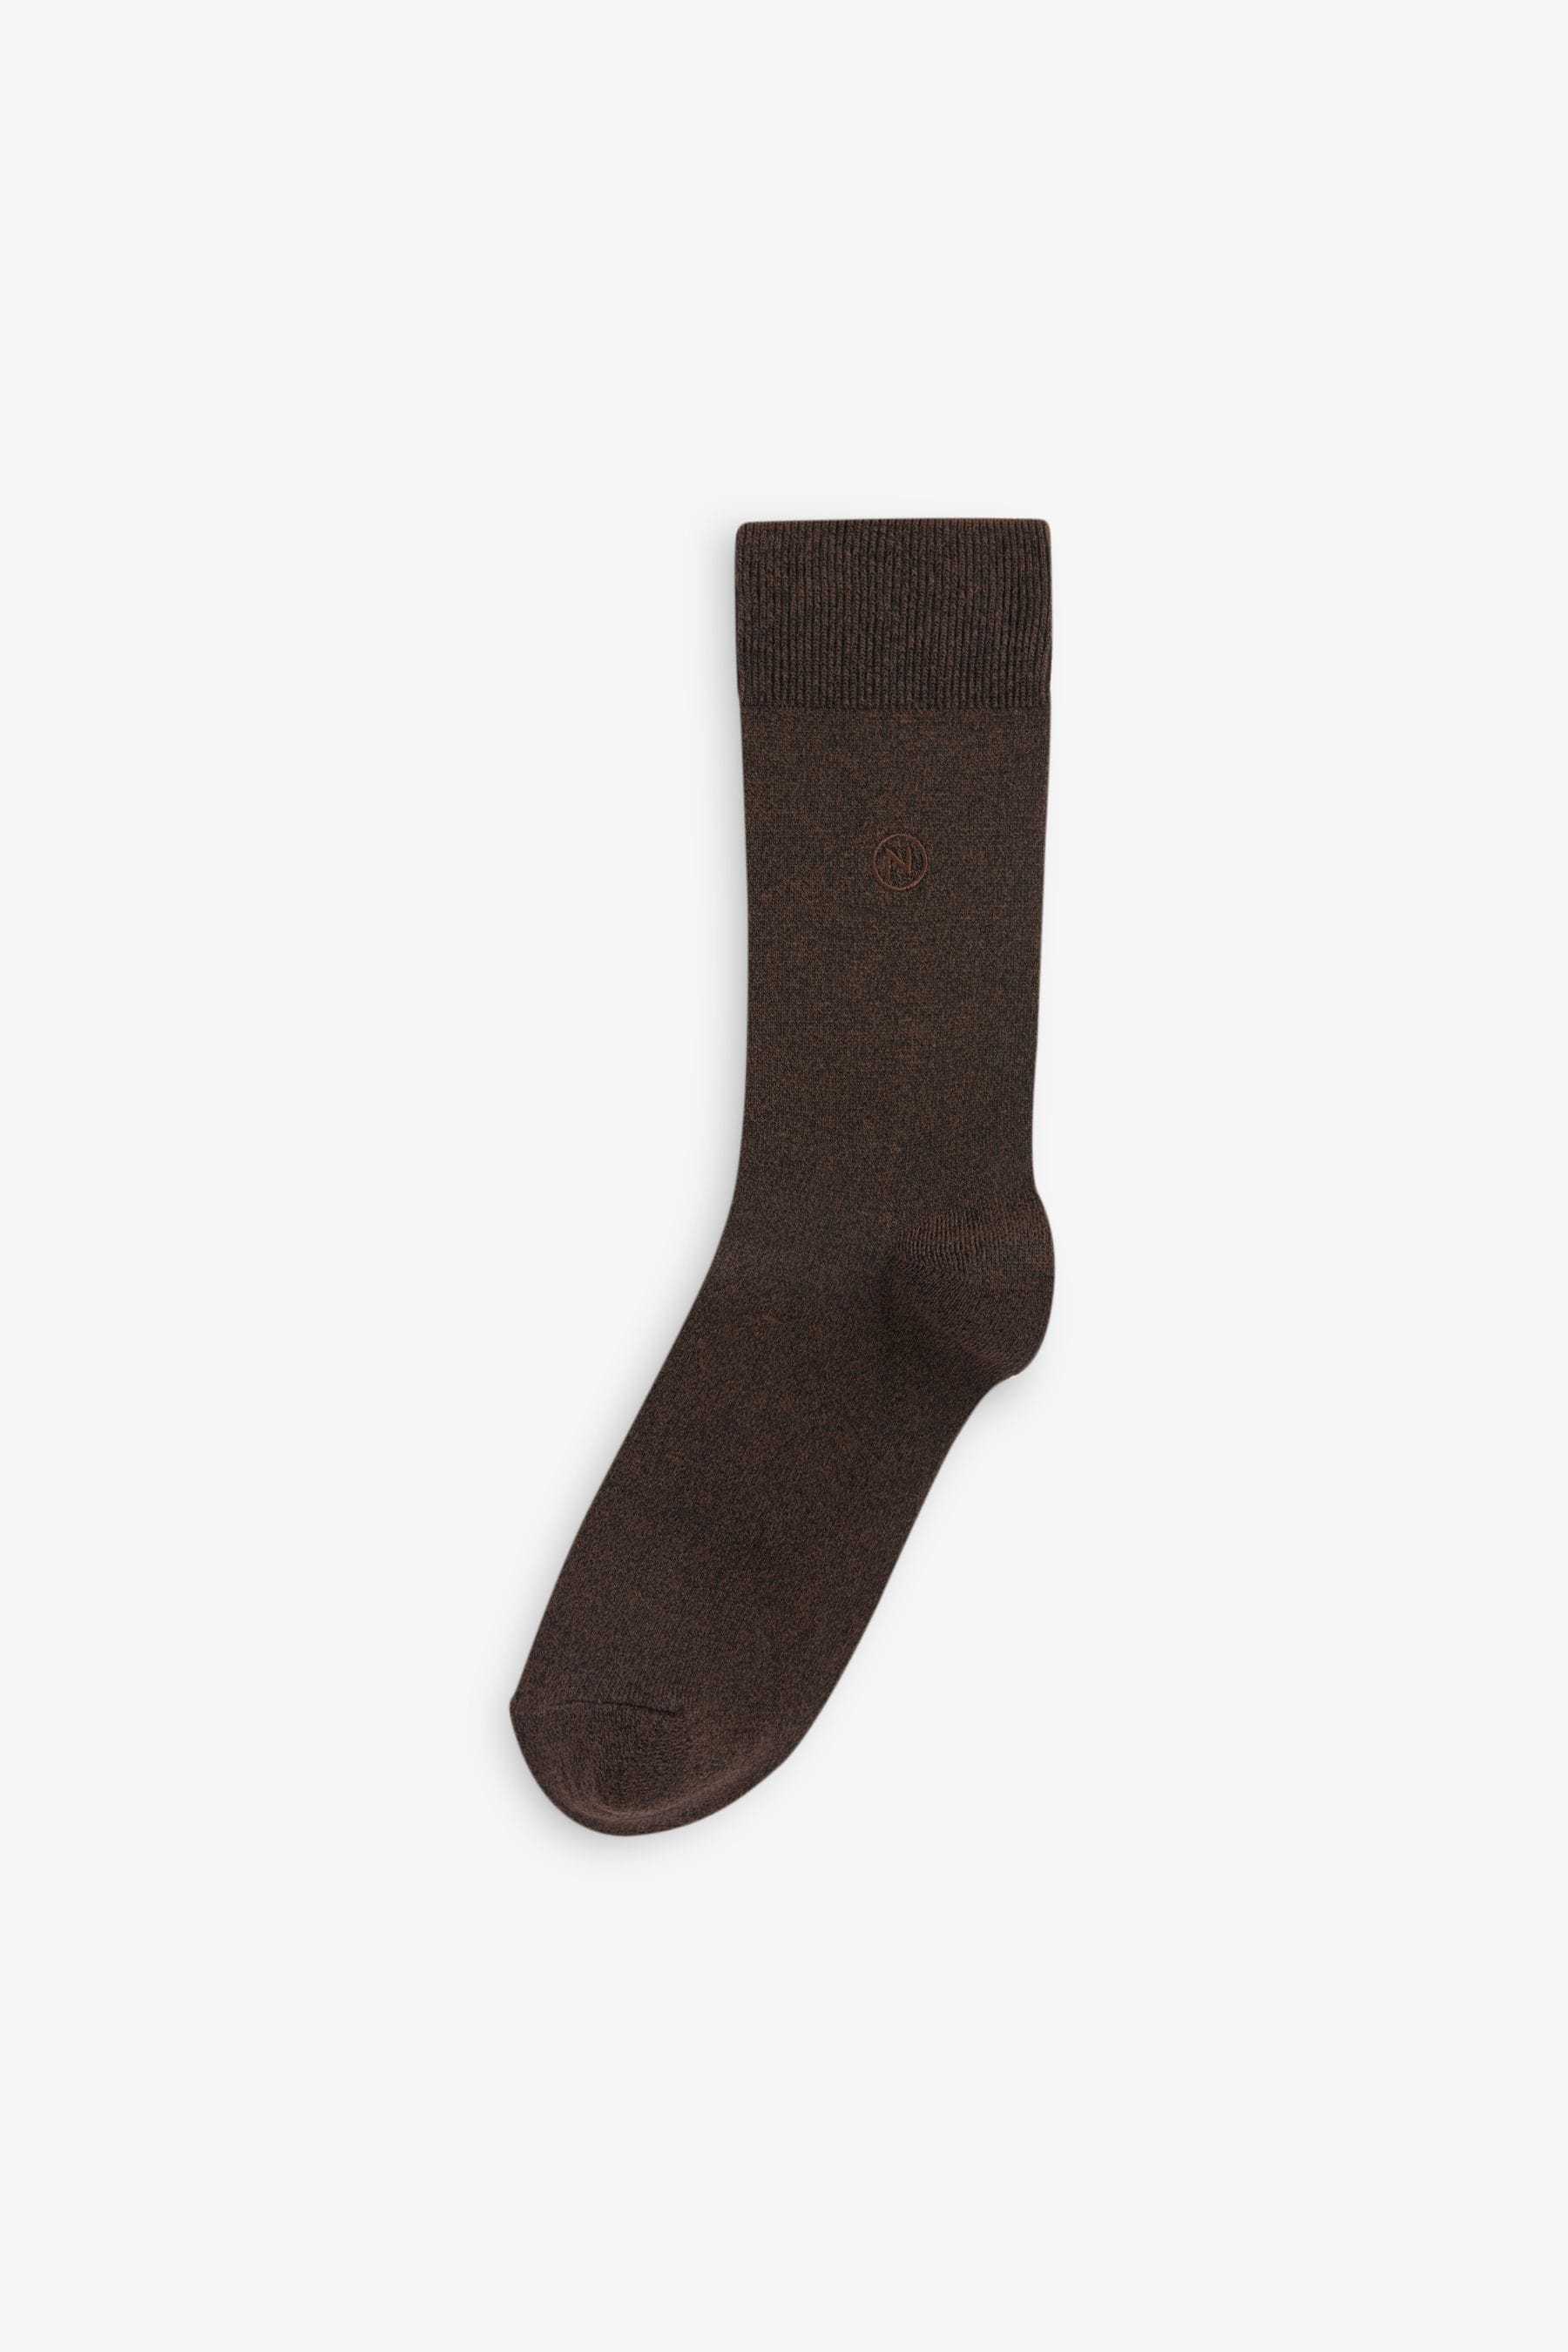 Buy Neutrals 5 Pack Embroidered Lasting Fresh Socks from Next Ireland